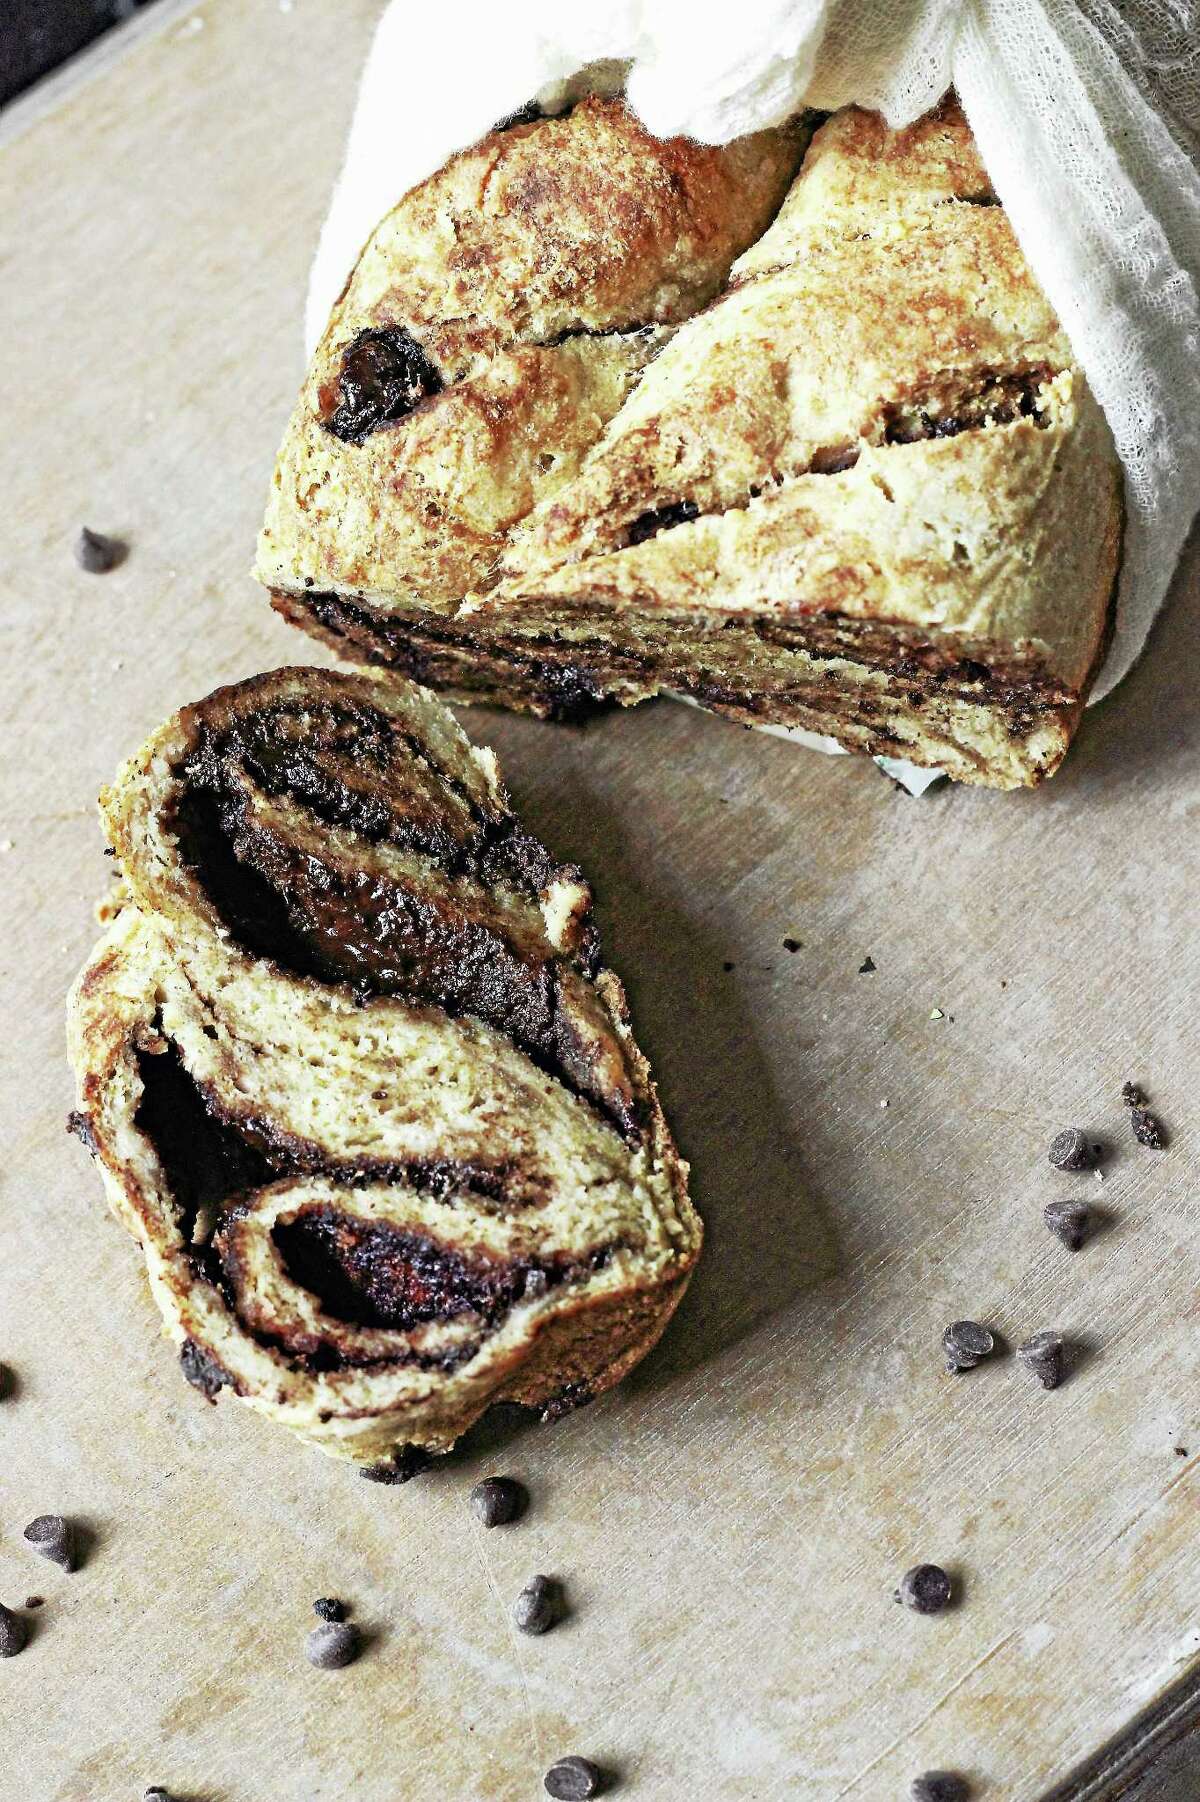 This chocolate babka recipe uses a special blend of ingredients to re-create a universal favorite.